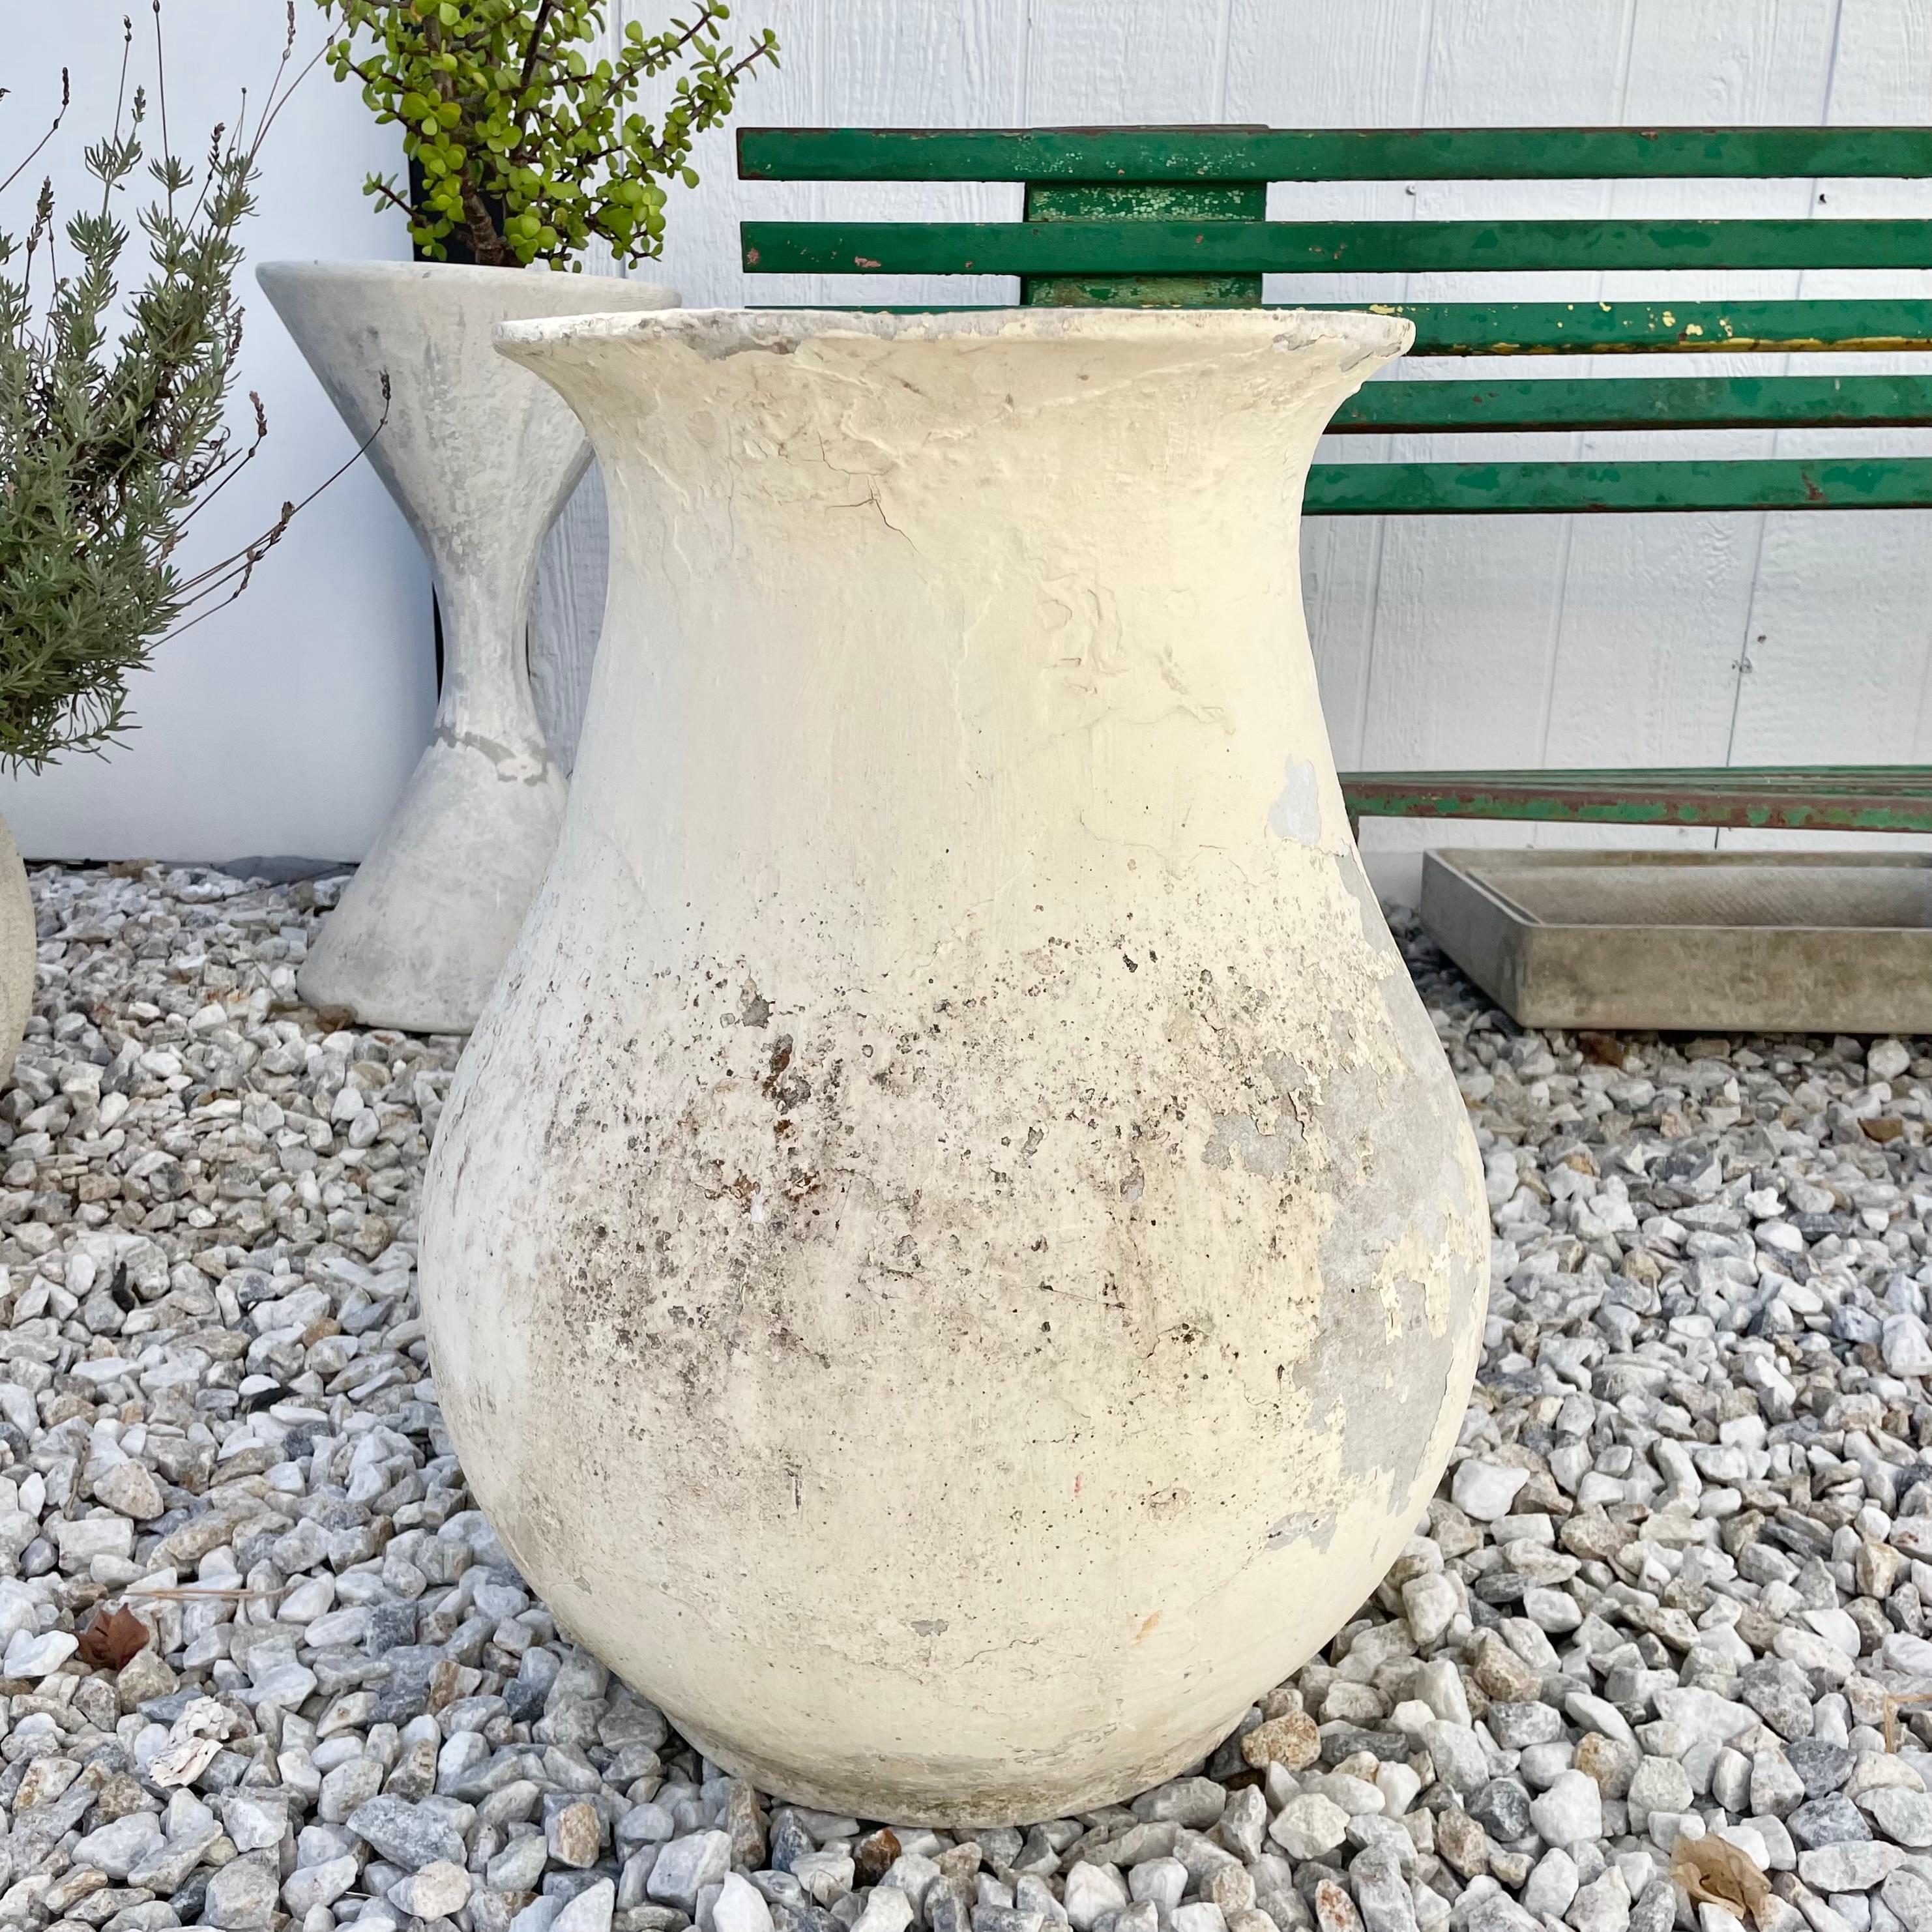 Spectacular concrete vase by Willy Guhl. Extremely rare model. Slightly tapered neck with pronounced lip spout. Made of fiber cement. Painted in a beige color with years of patina. Beautiful texture and color with great presence. Excellent